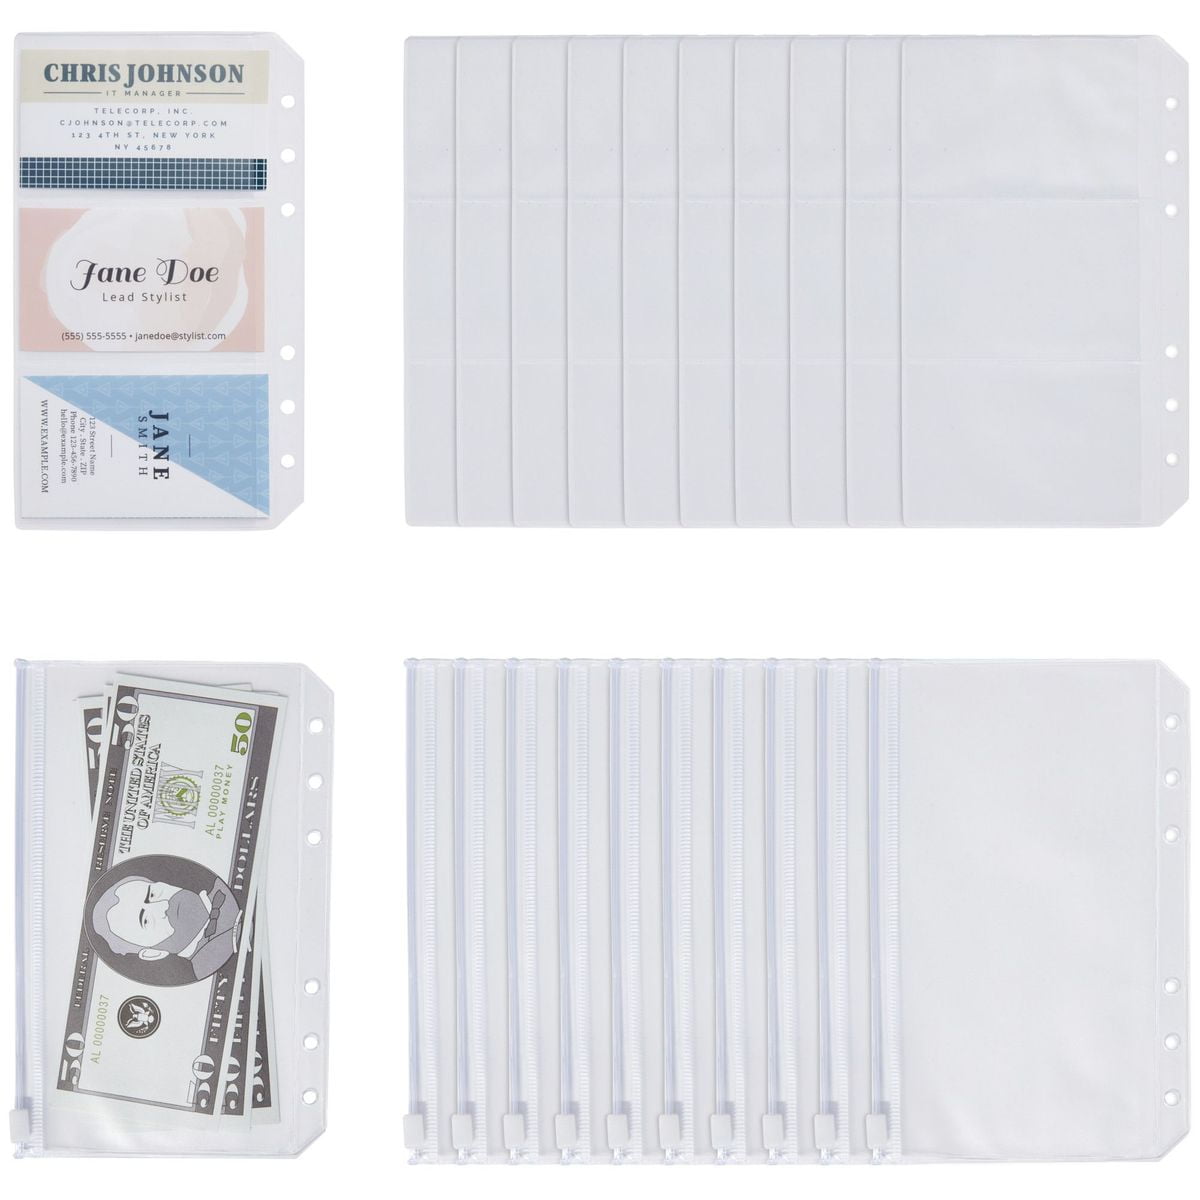 6 Colors, 24 Pack A6 Binder Pockets with Zipper Clear Cash Envelopes for Budgeting